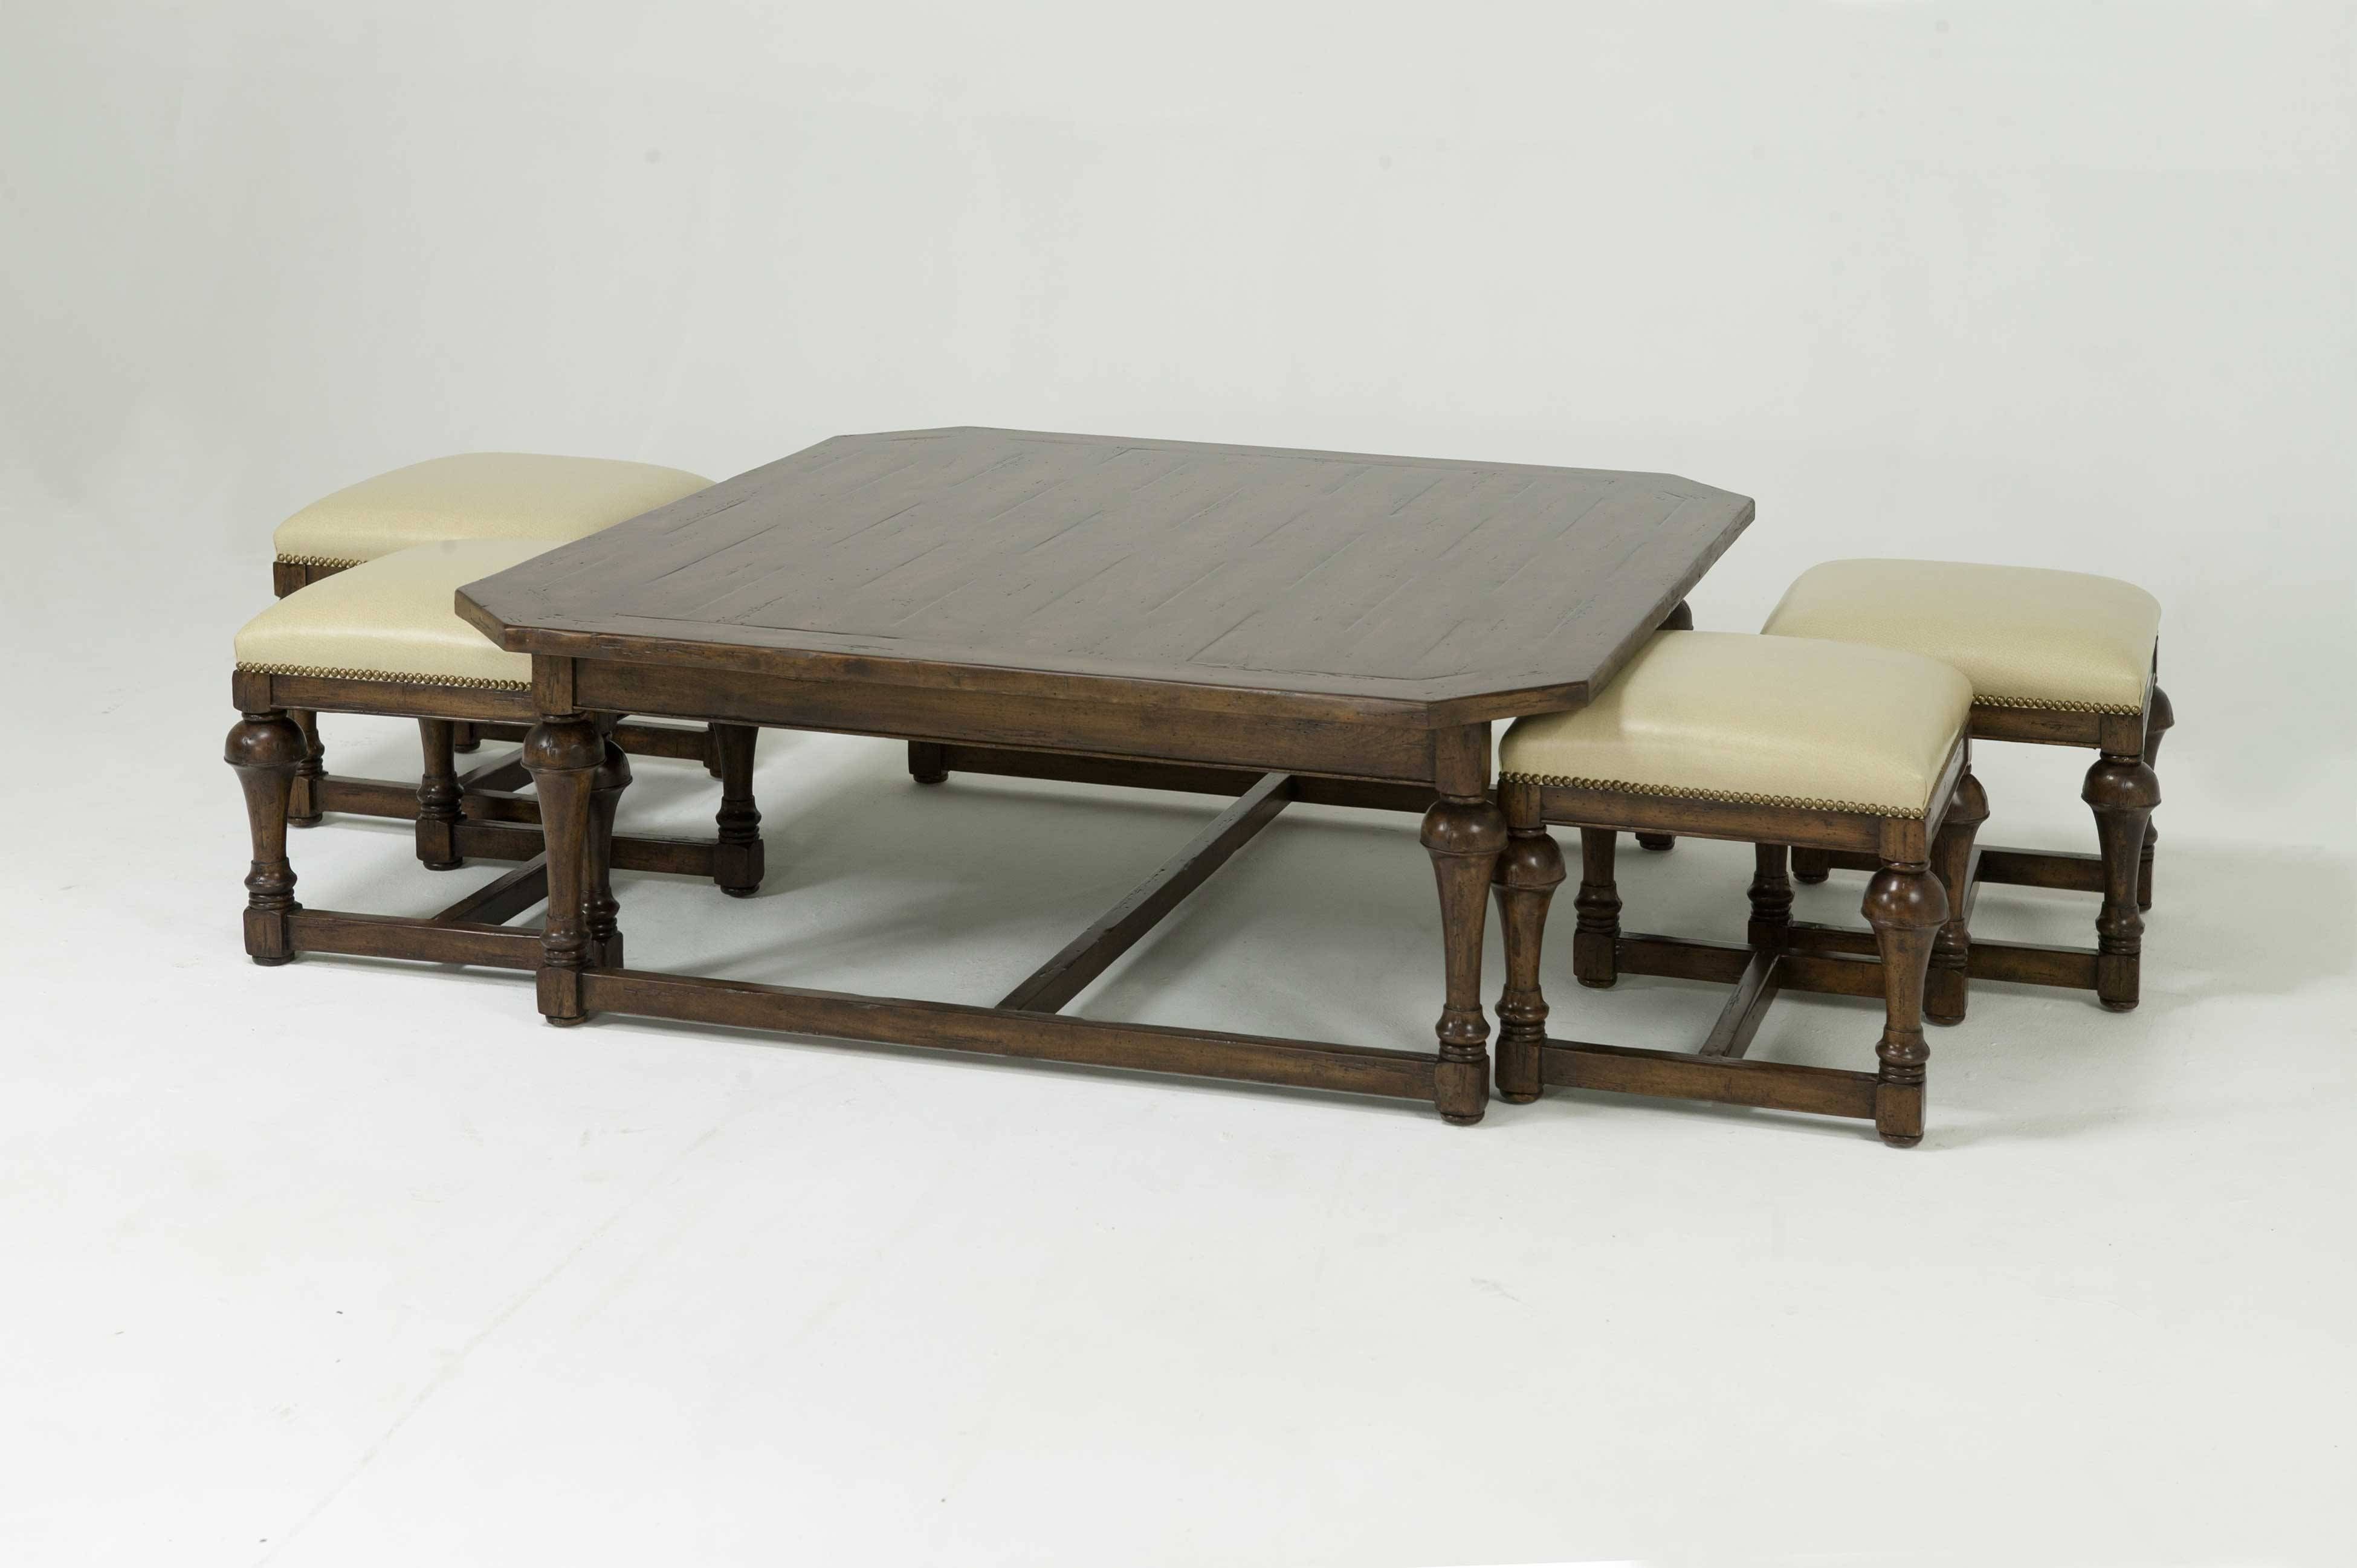 Furniture: Luxury Coffee Table With Stools For Living Room Inside Coffee Table With Stools (View 19 of 30)